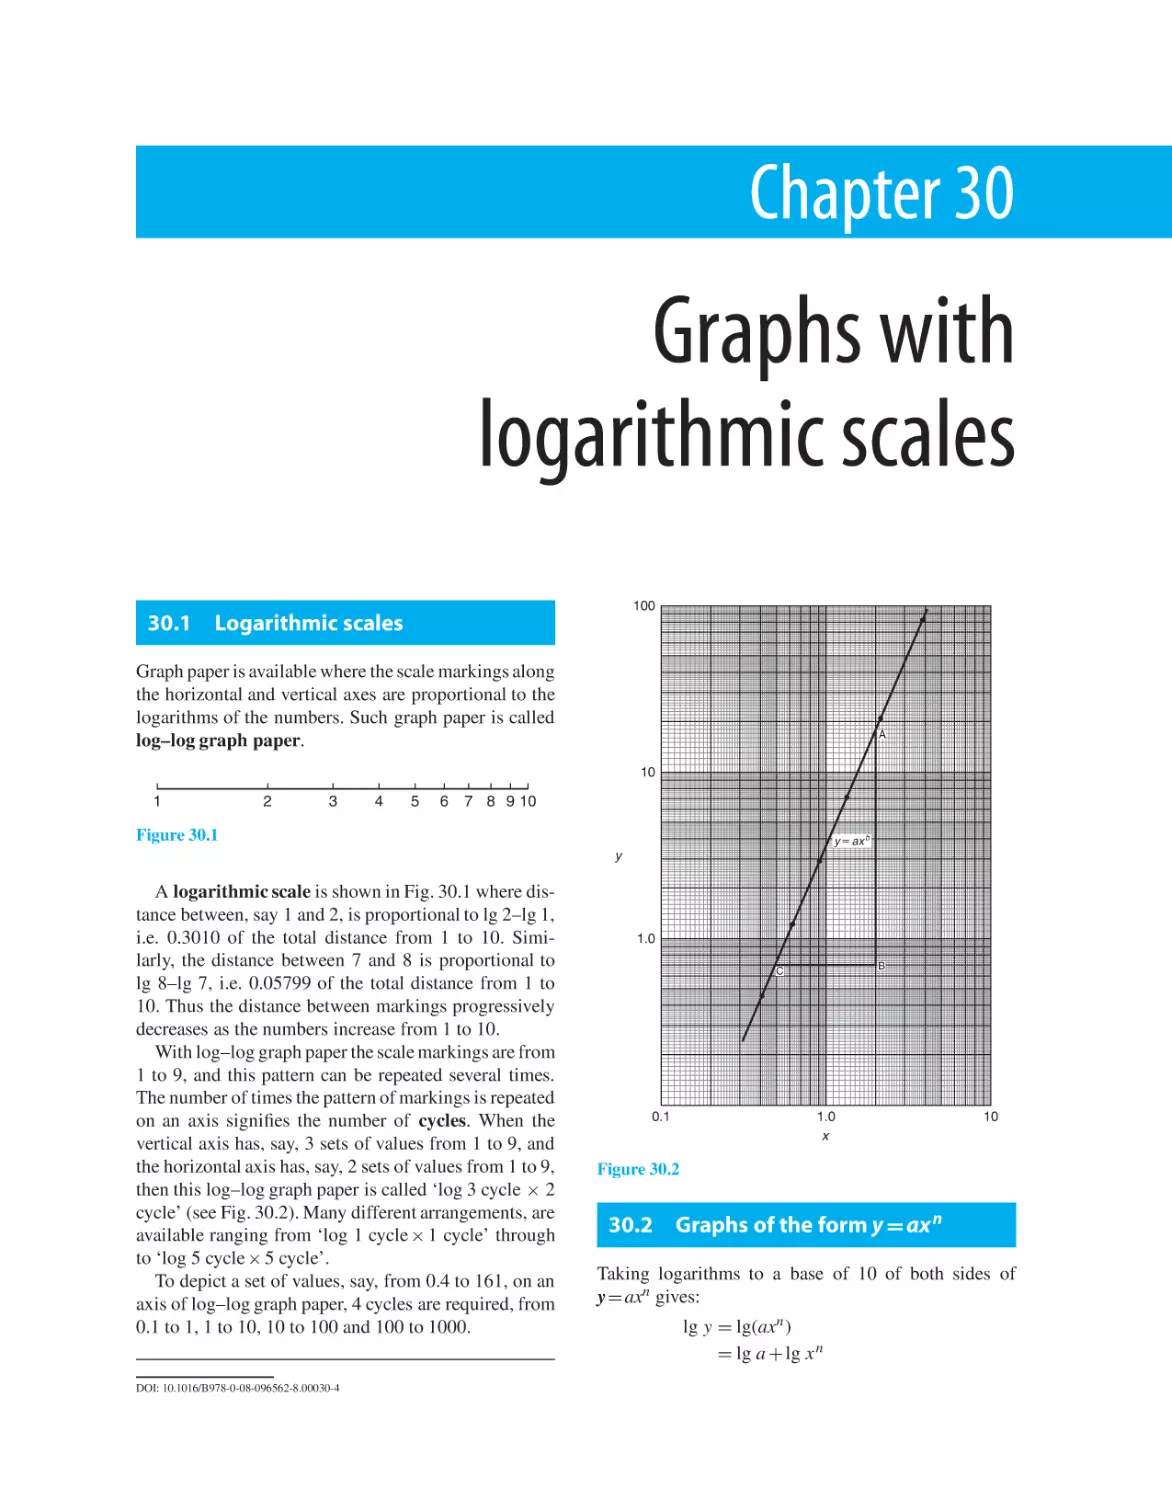 Chapter 30. Graphs with logarithmic scales
30.1 Logarithmic scales
30.2 Graphs of the form y = axn